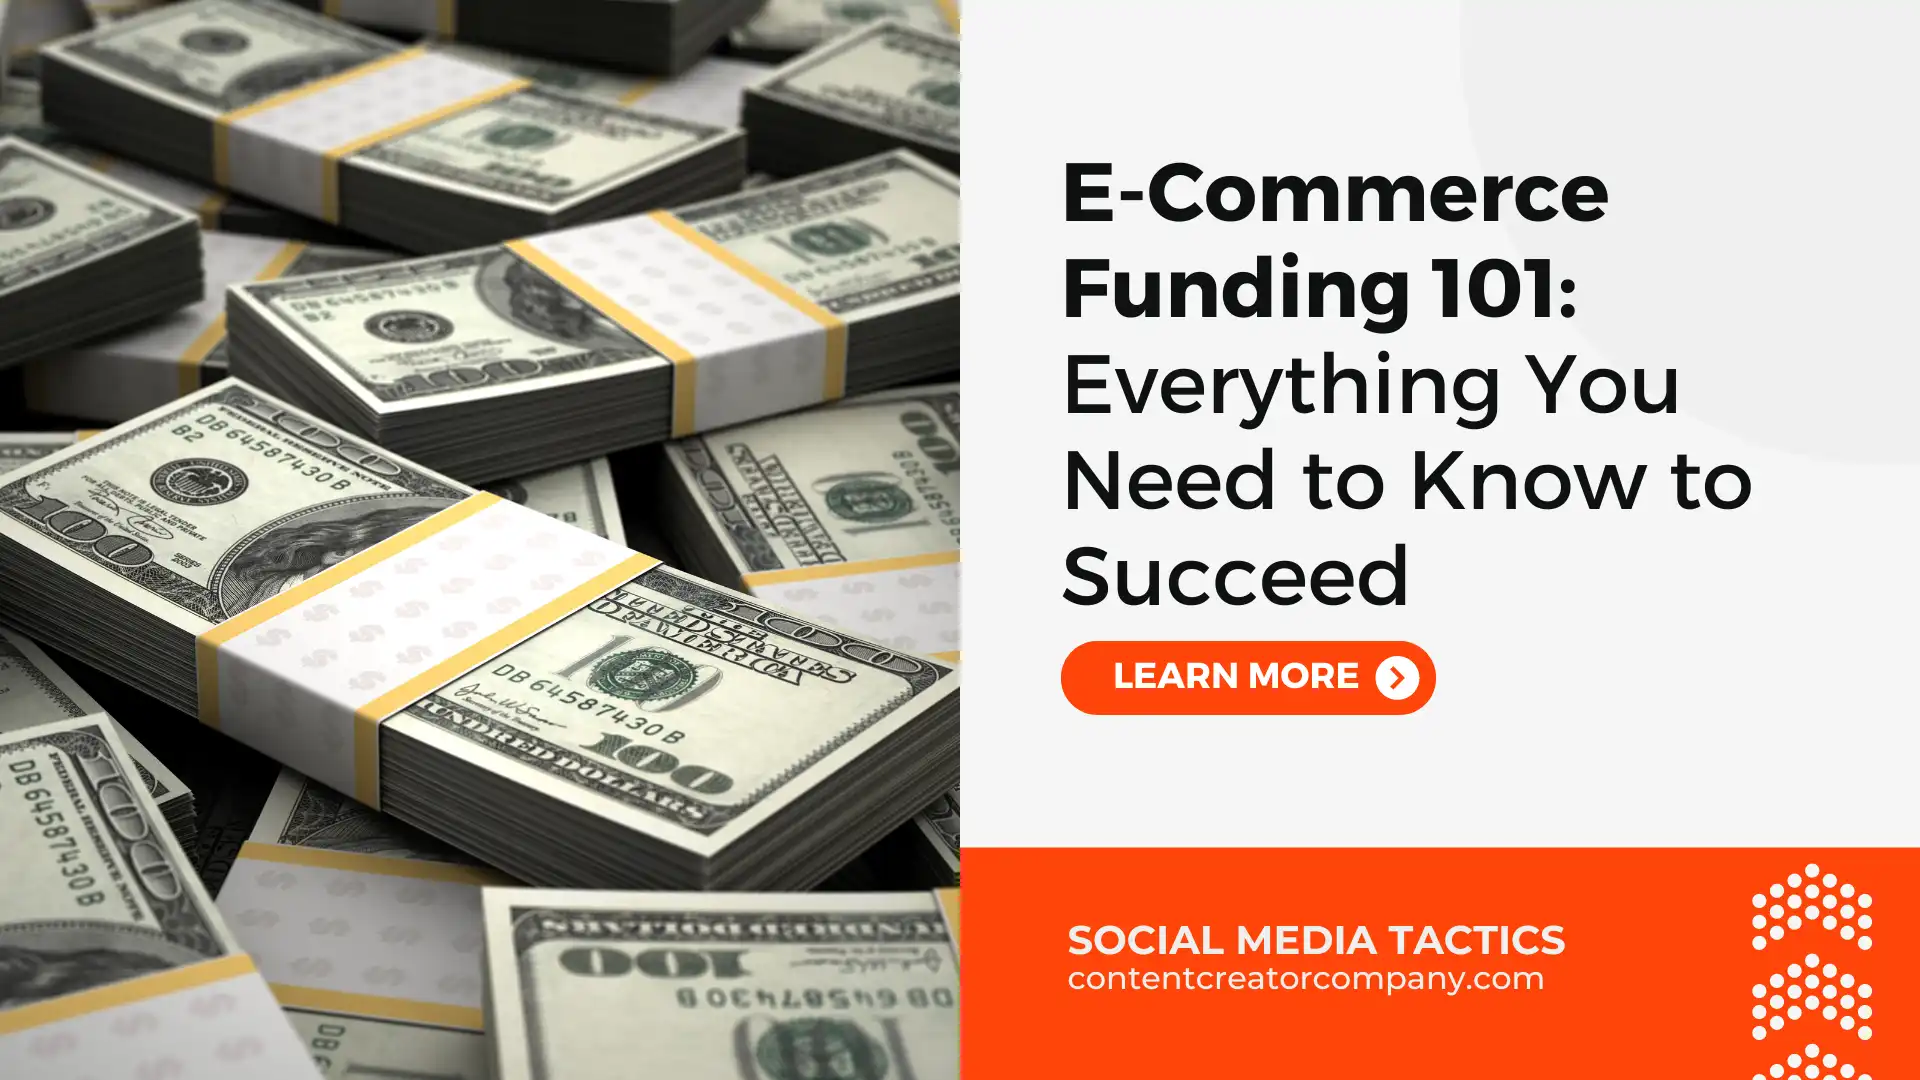 E-Commerce Funding 101: Everything You Need to Know to Succeed